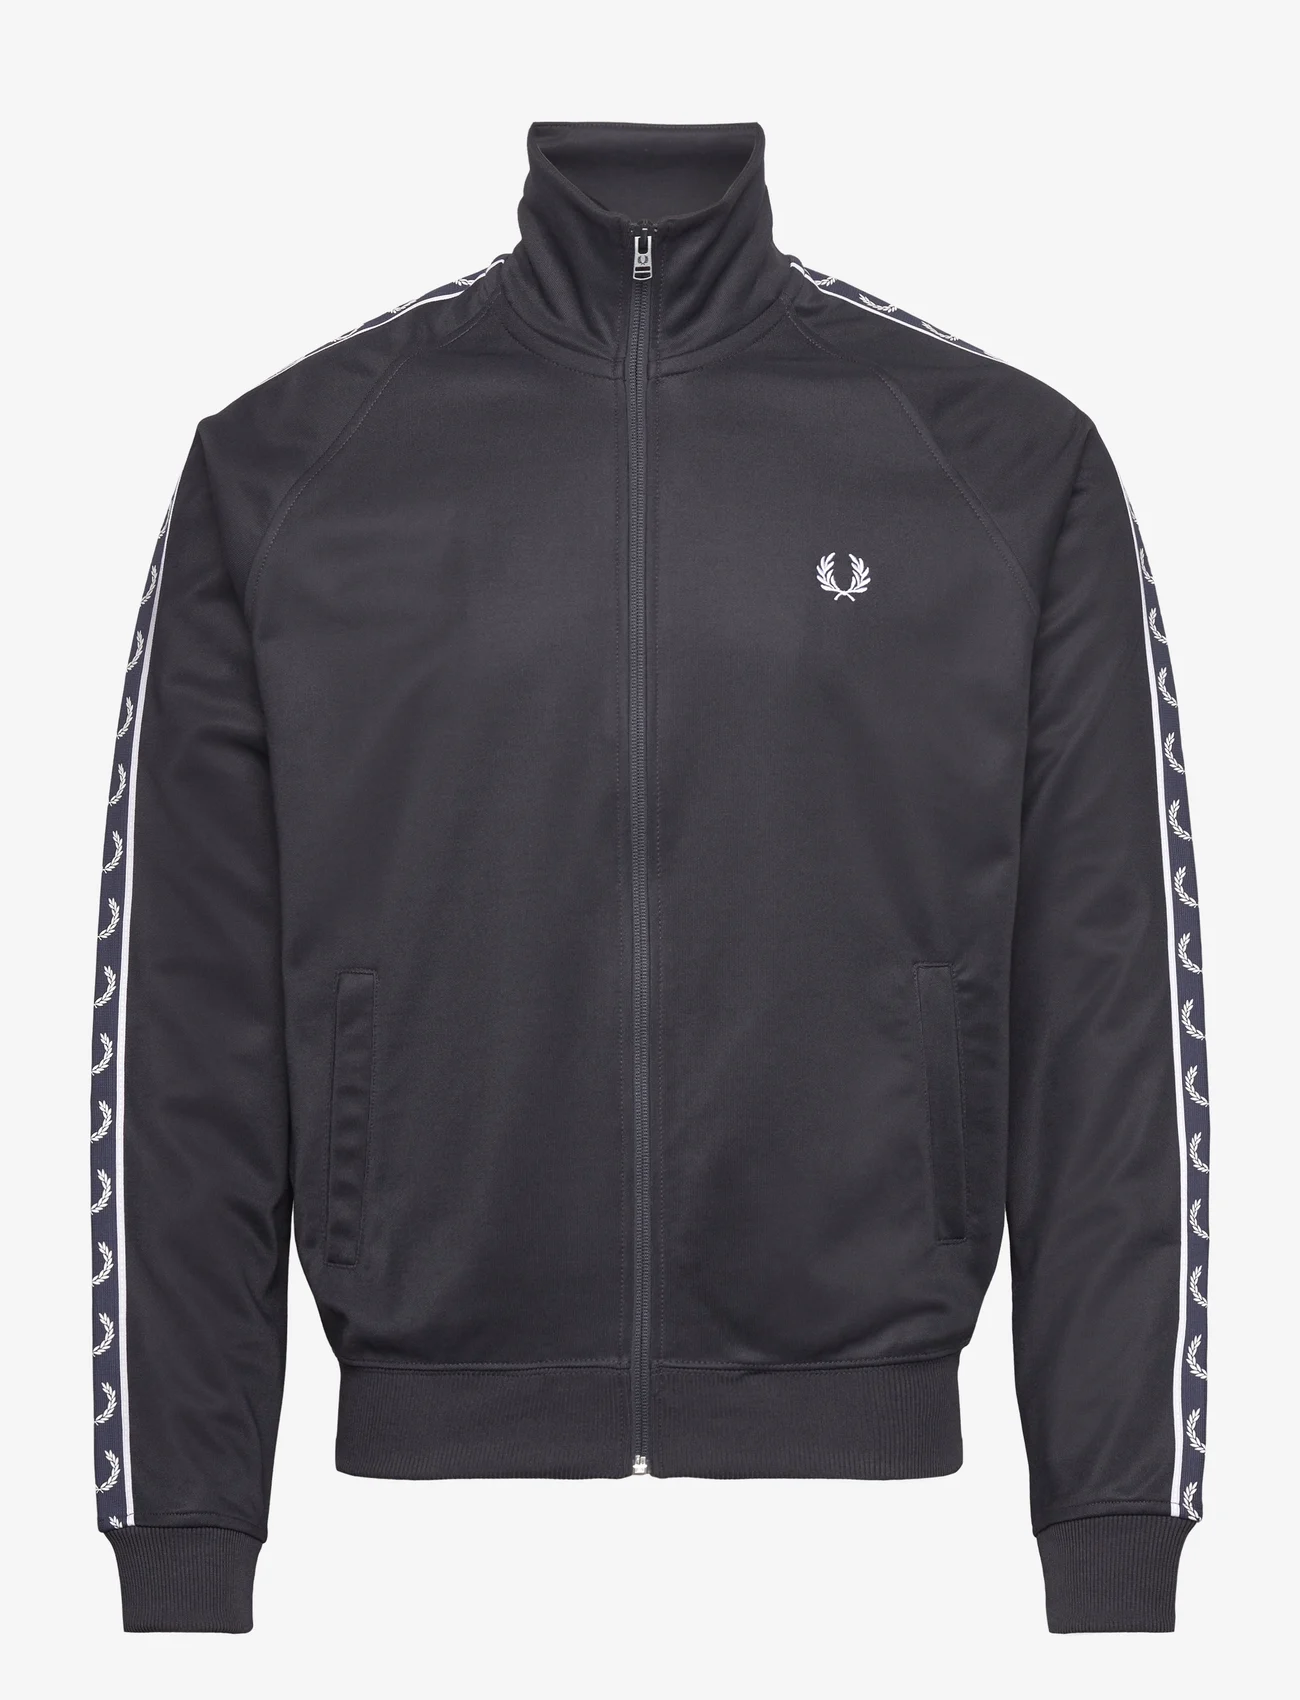 Fred Perry - CONTRAST TAPE TRACK JKT - sweatshirts - navy/navy - 0